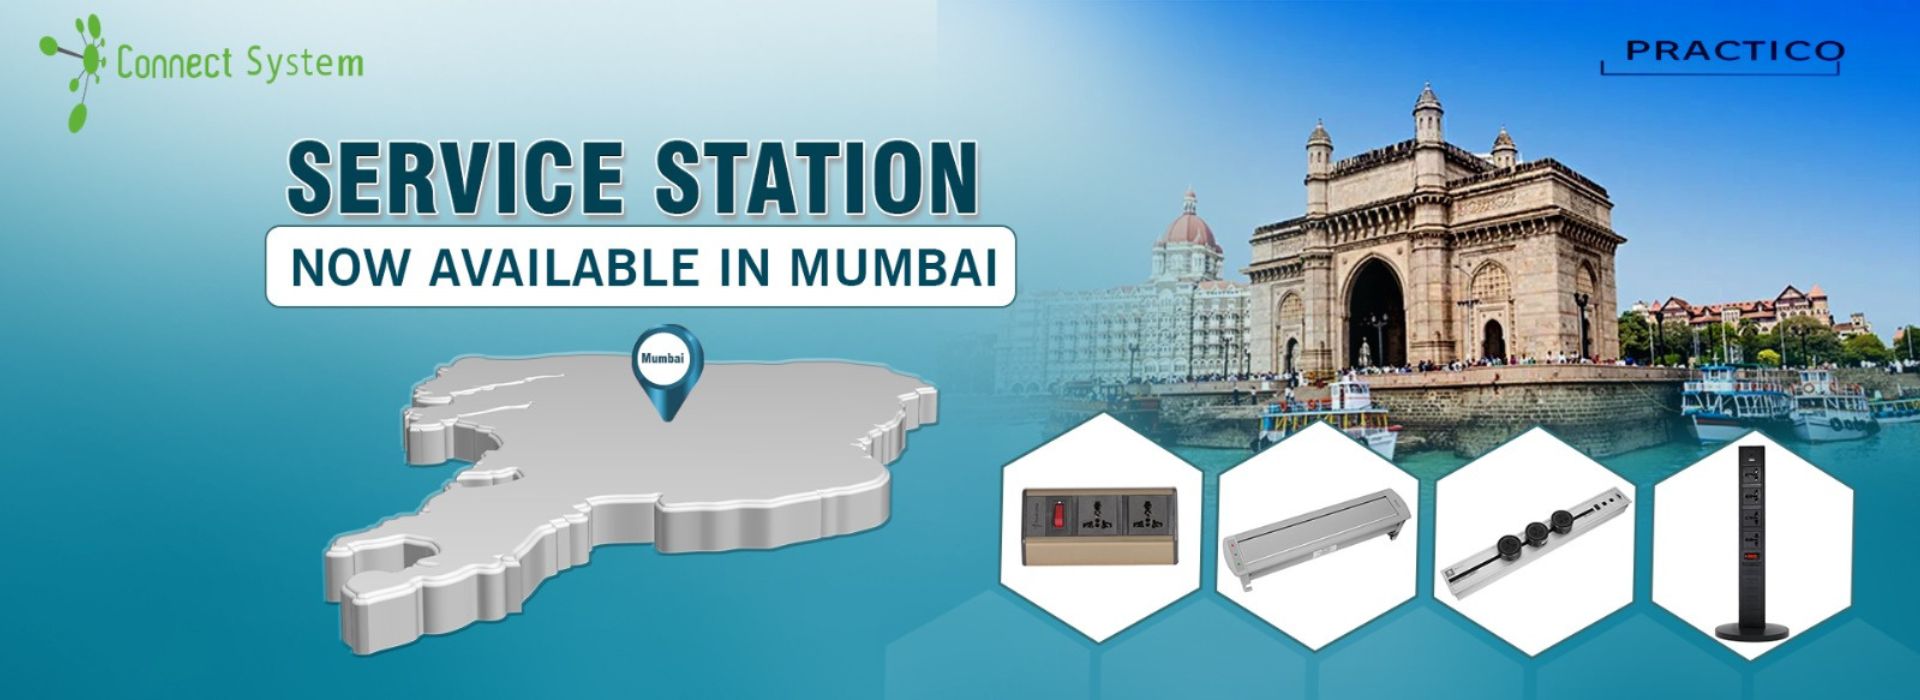 connect system service station available in mumbai